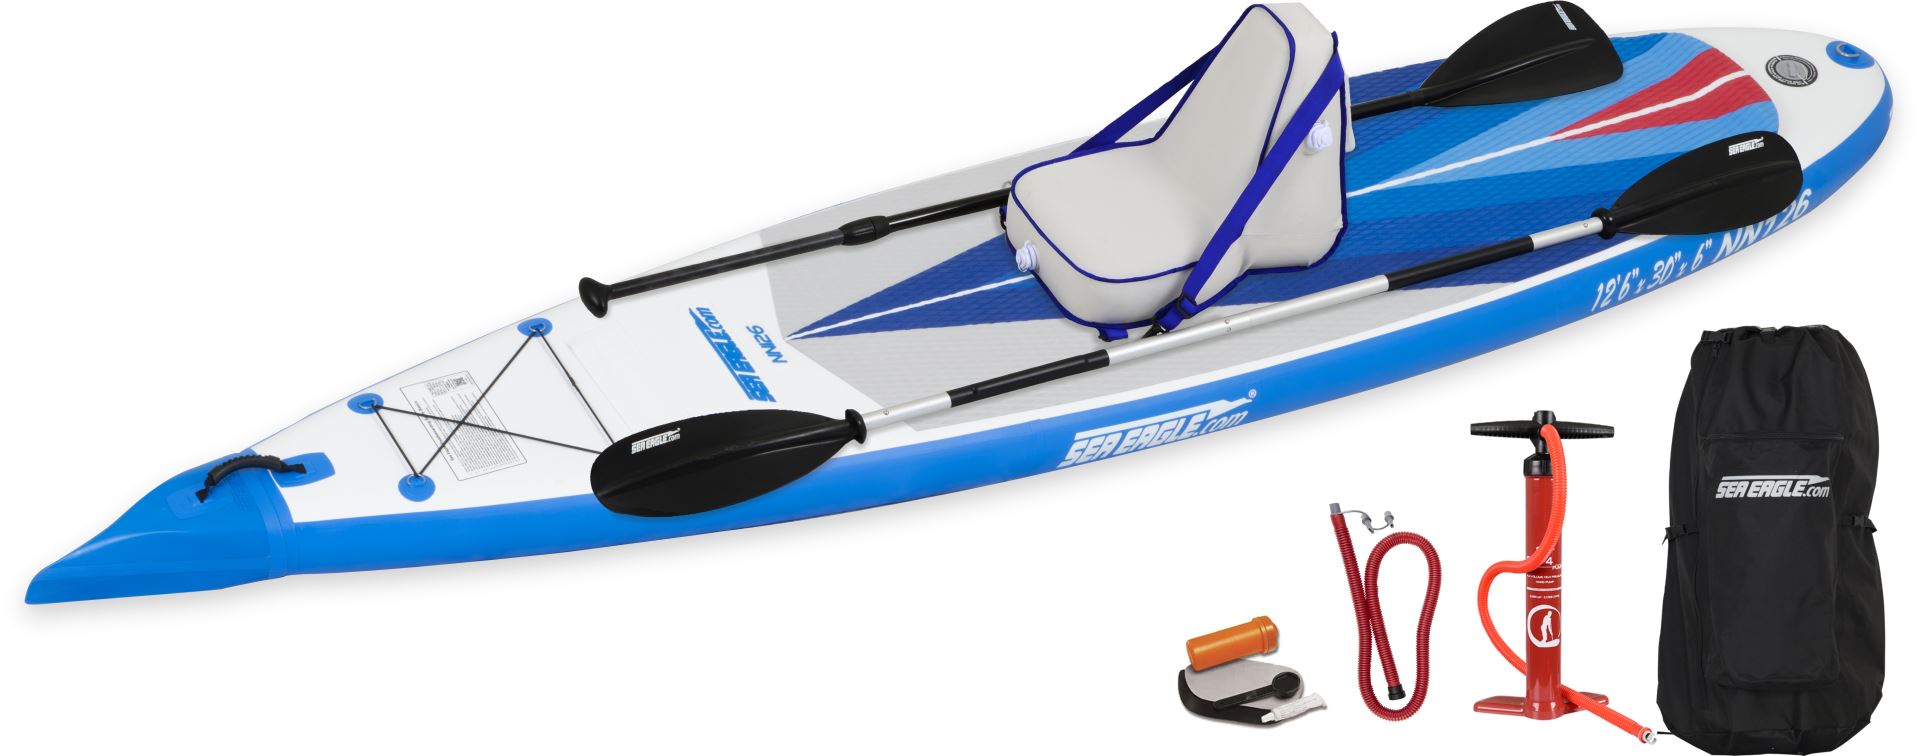 Sea Eagle FishSUP 126 Inflatable Fishing Stand-Up Paddleboard Swivel Seat  Package FS126K_FR